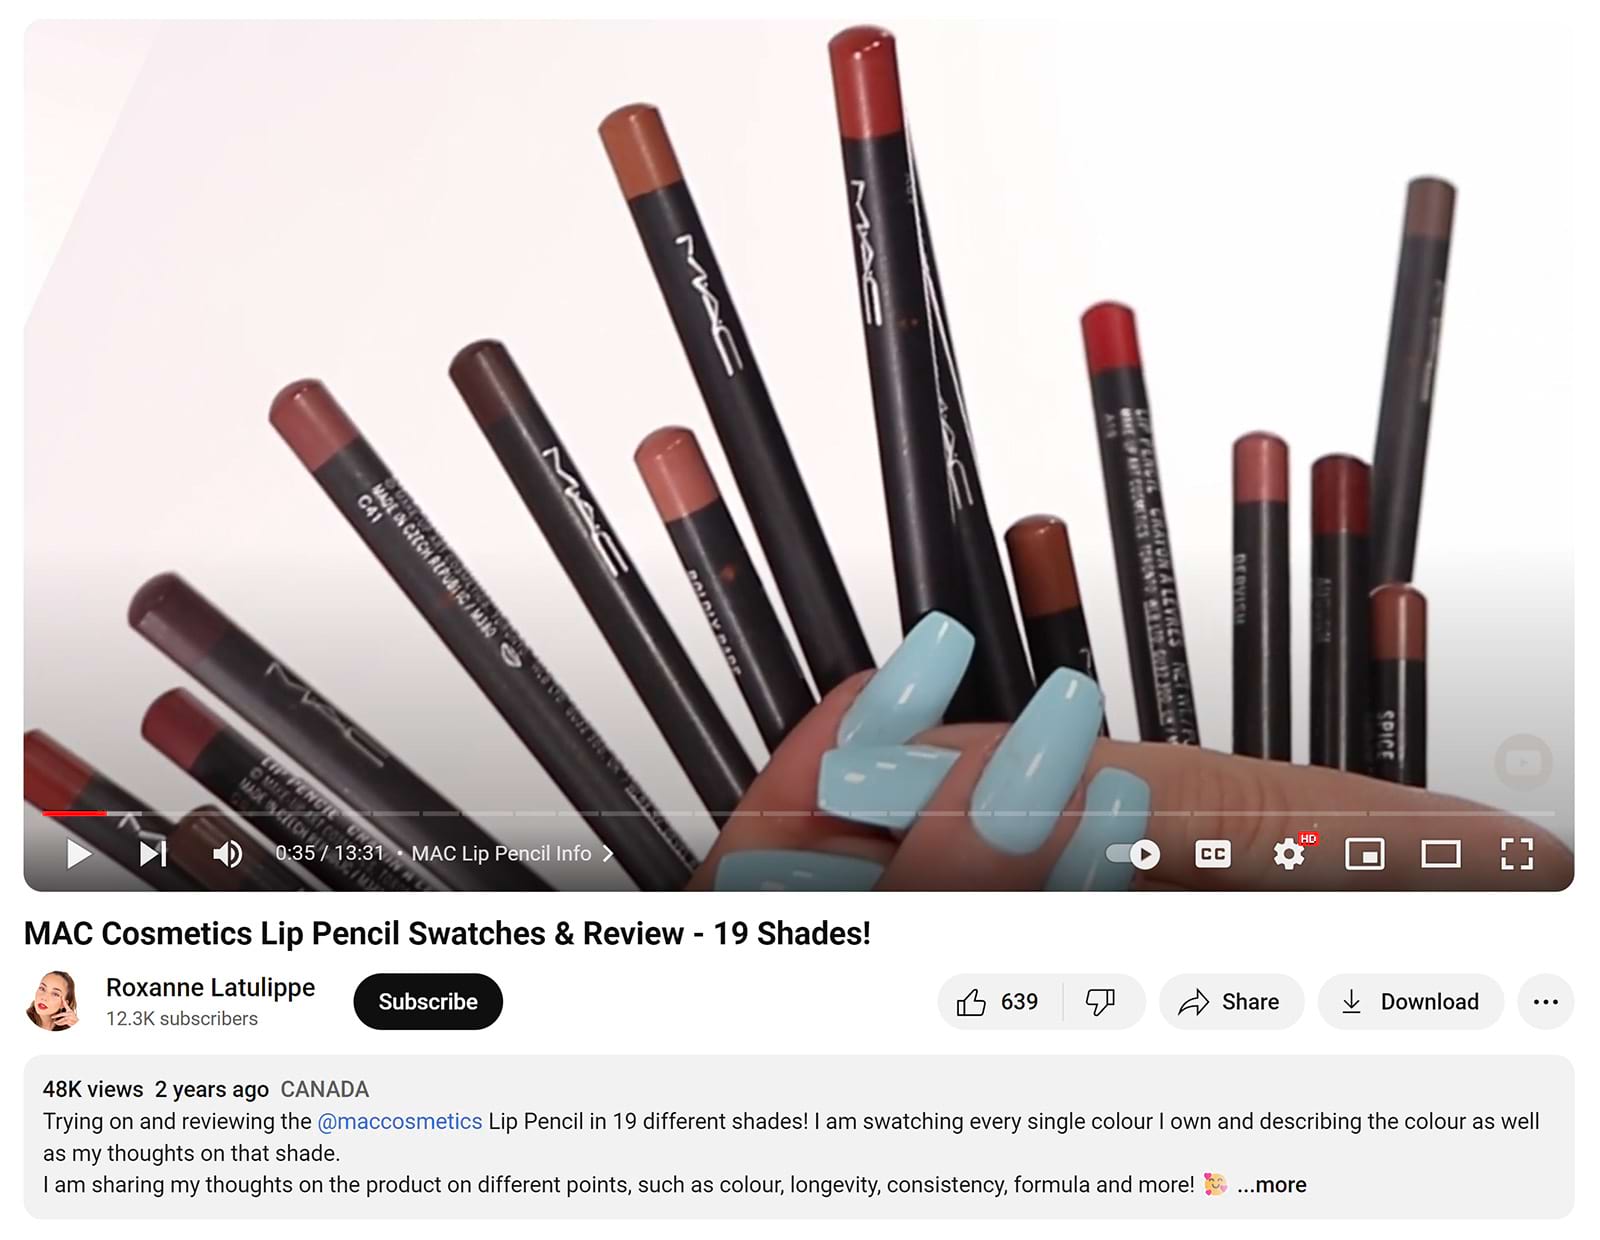 YouTube video about MAC cosmetics lip pencils by Roxanne Latulippe without sponsorships or affiliations.